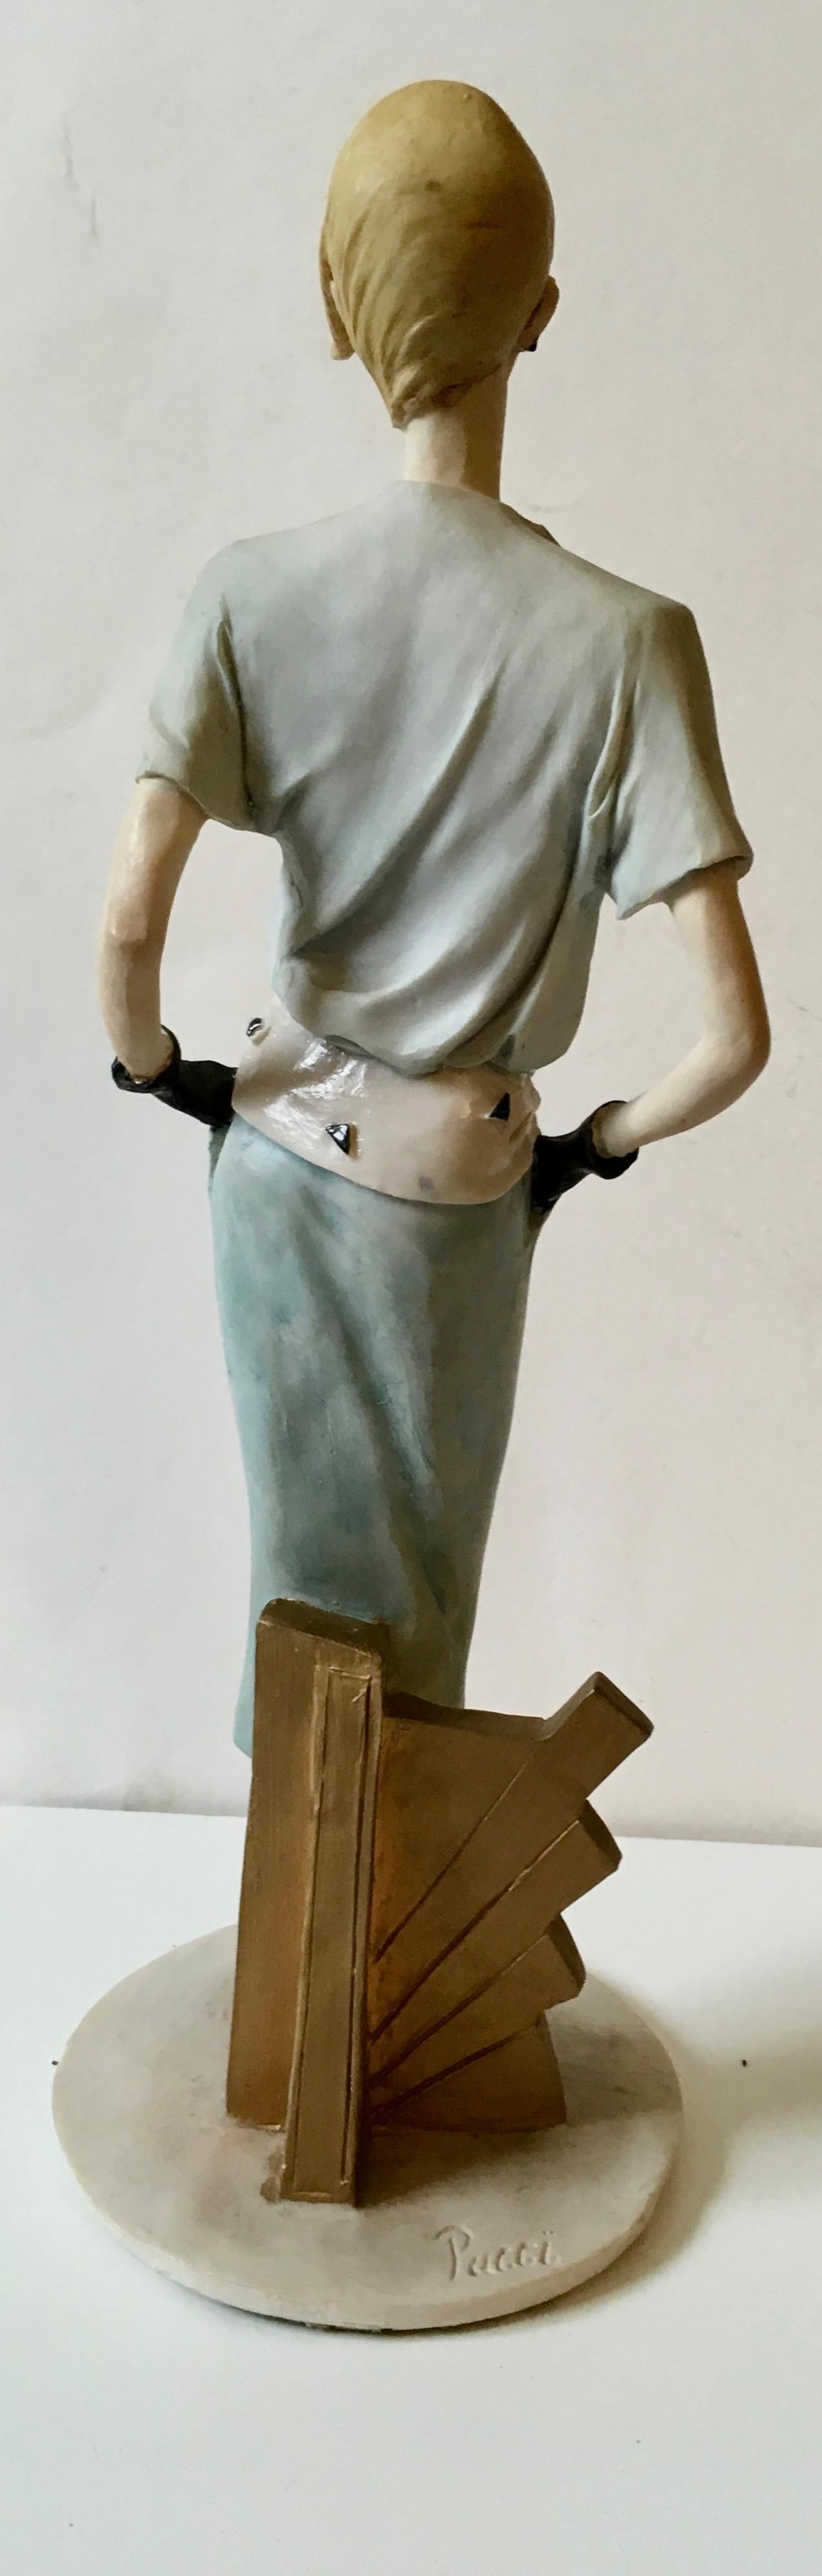 Pucci Display Statue from 1960's Pucci Boutique in Europe For Sale 1